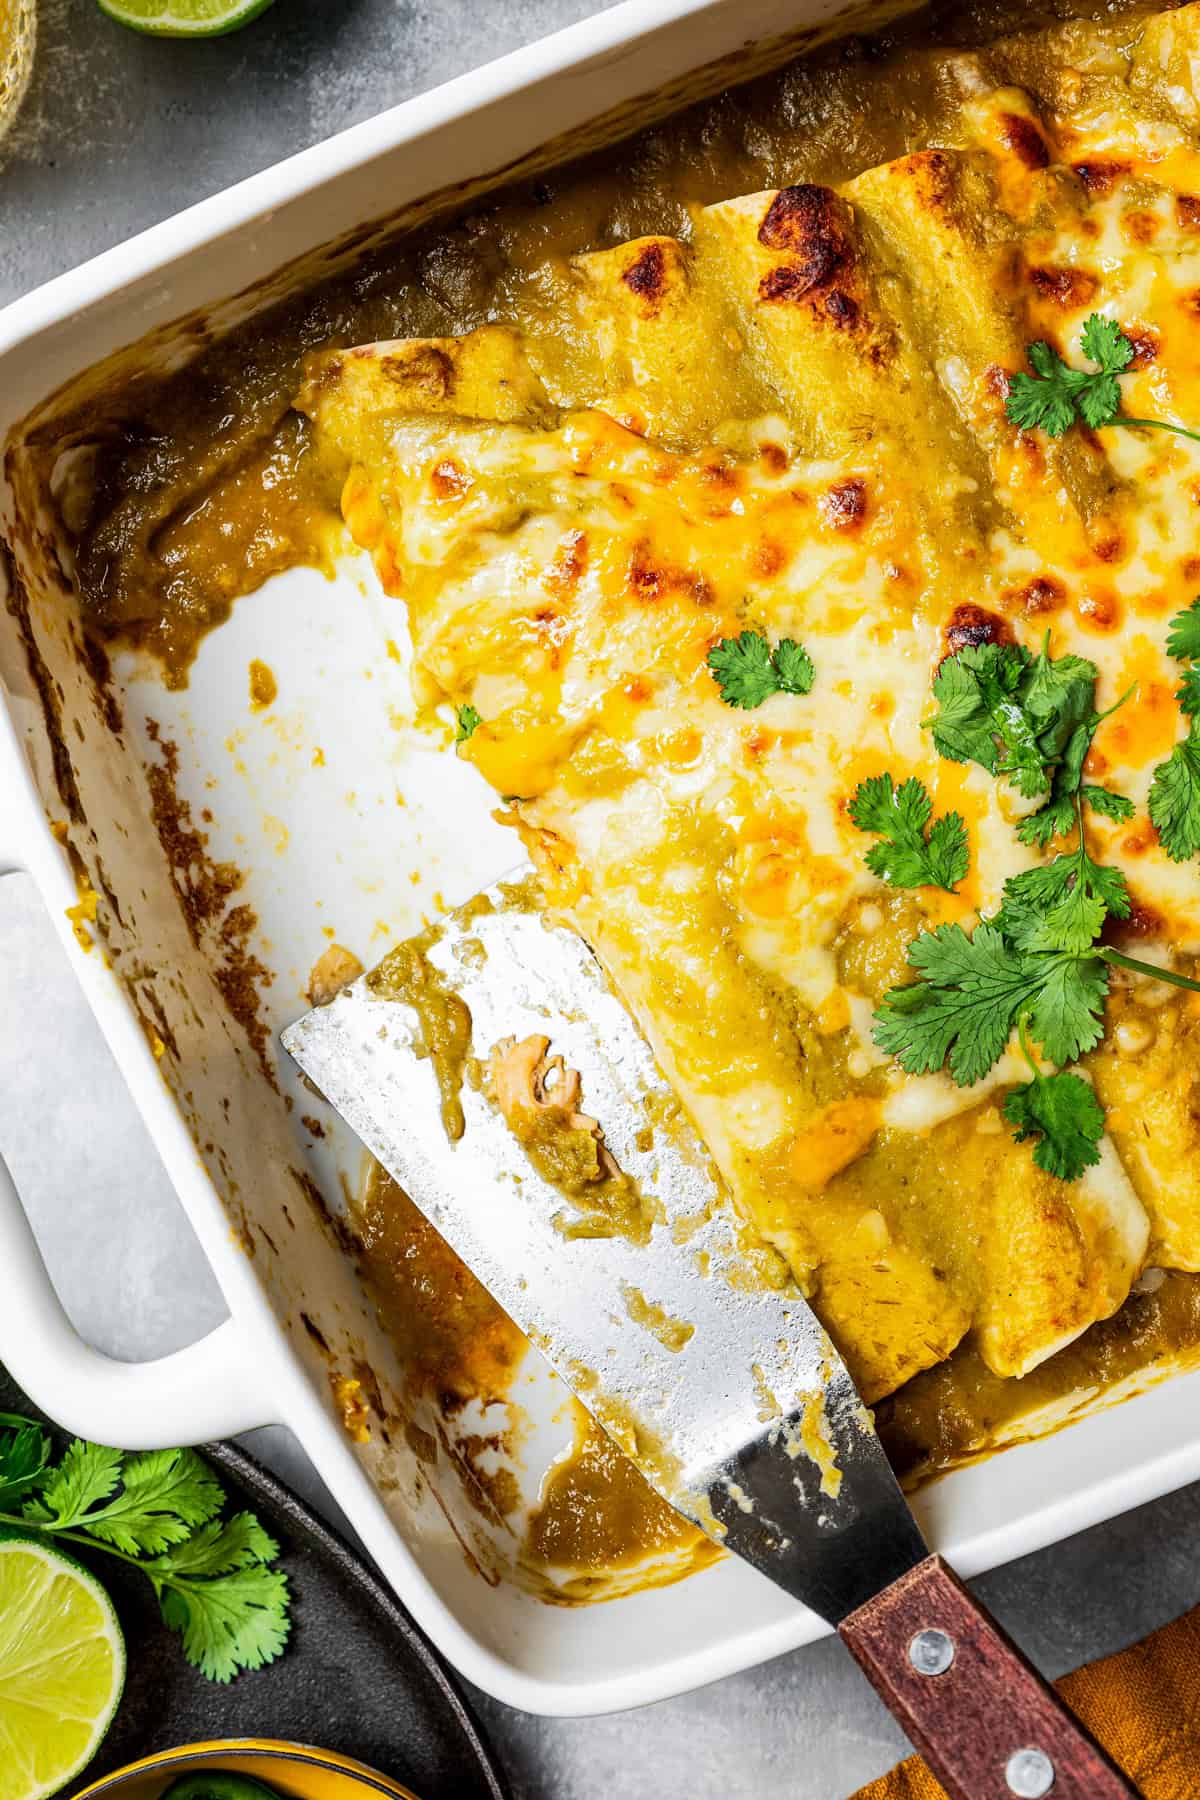 Overhead view of enchiladas in a baking dish with two portions missing, and a spatula resting in the dish.